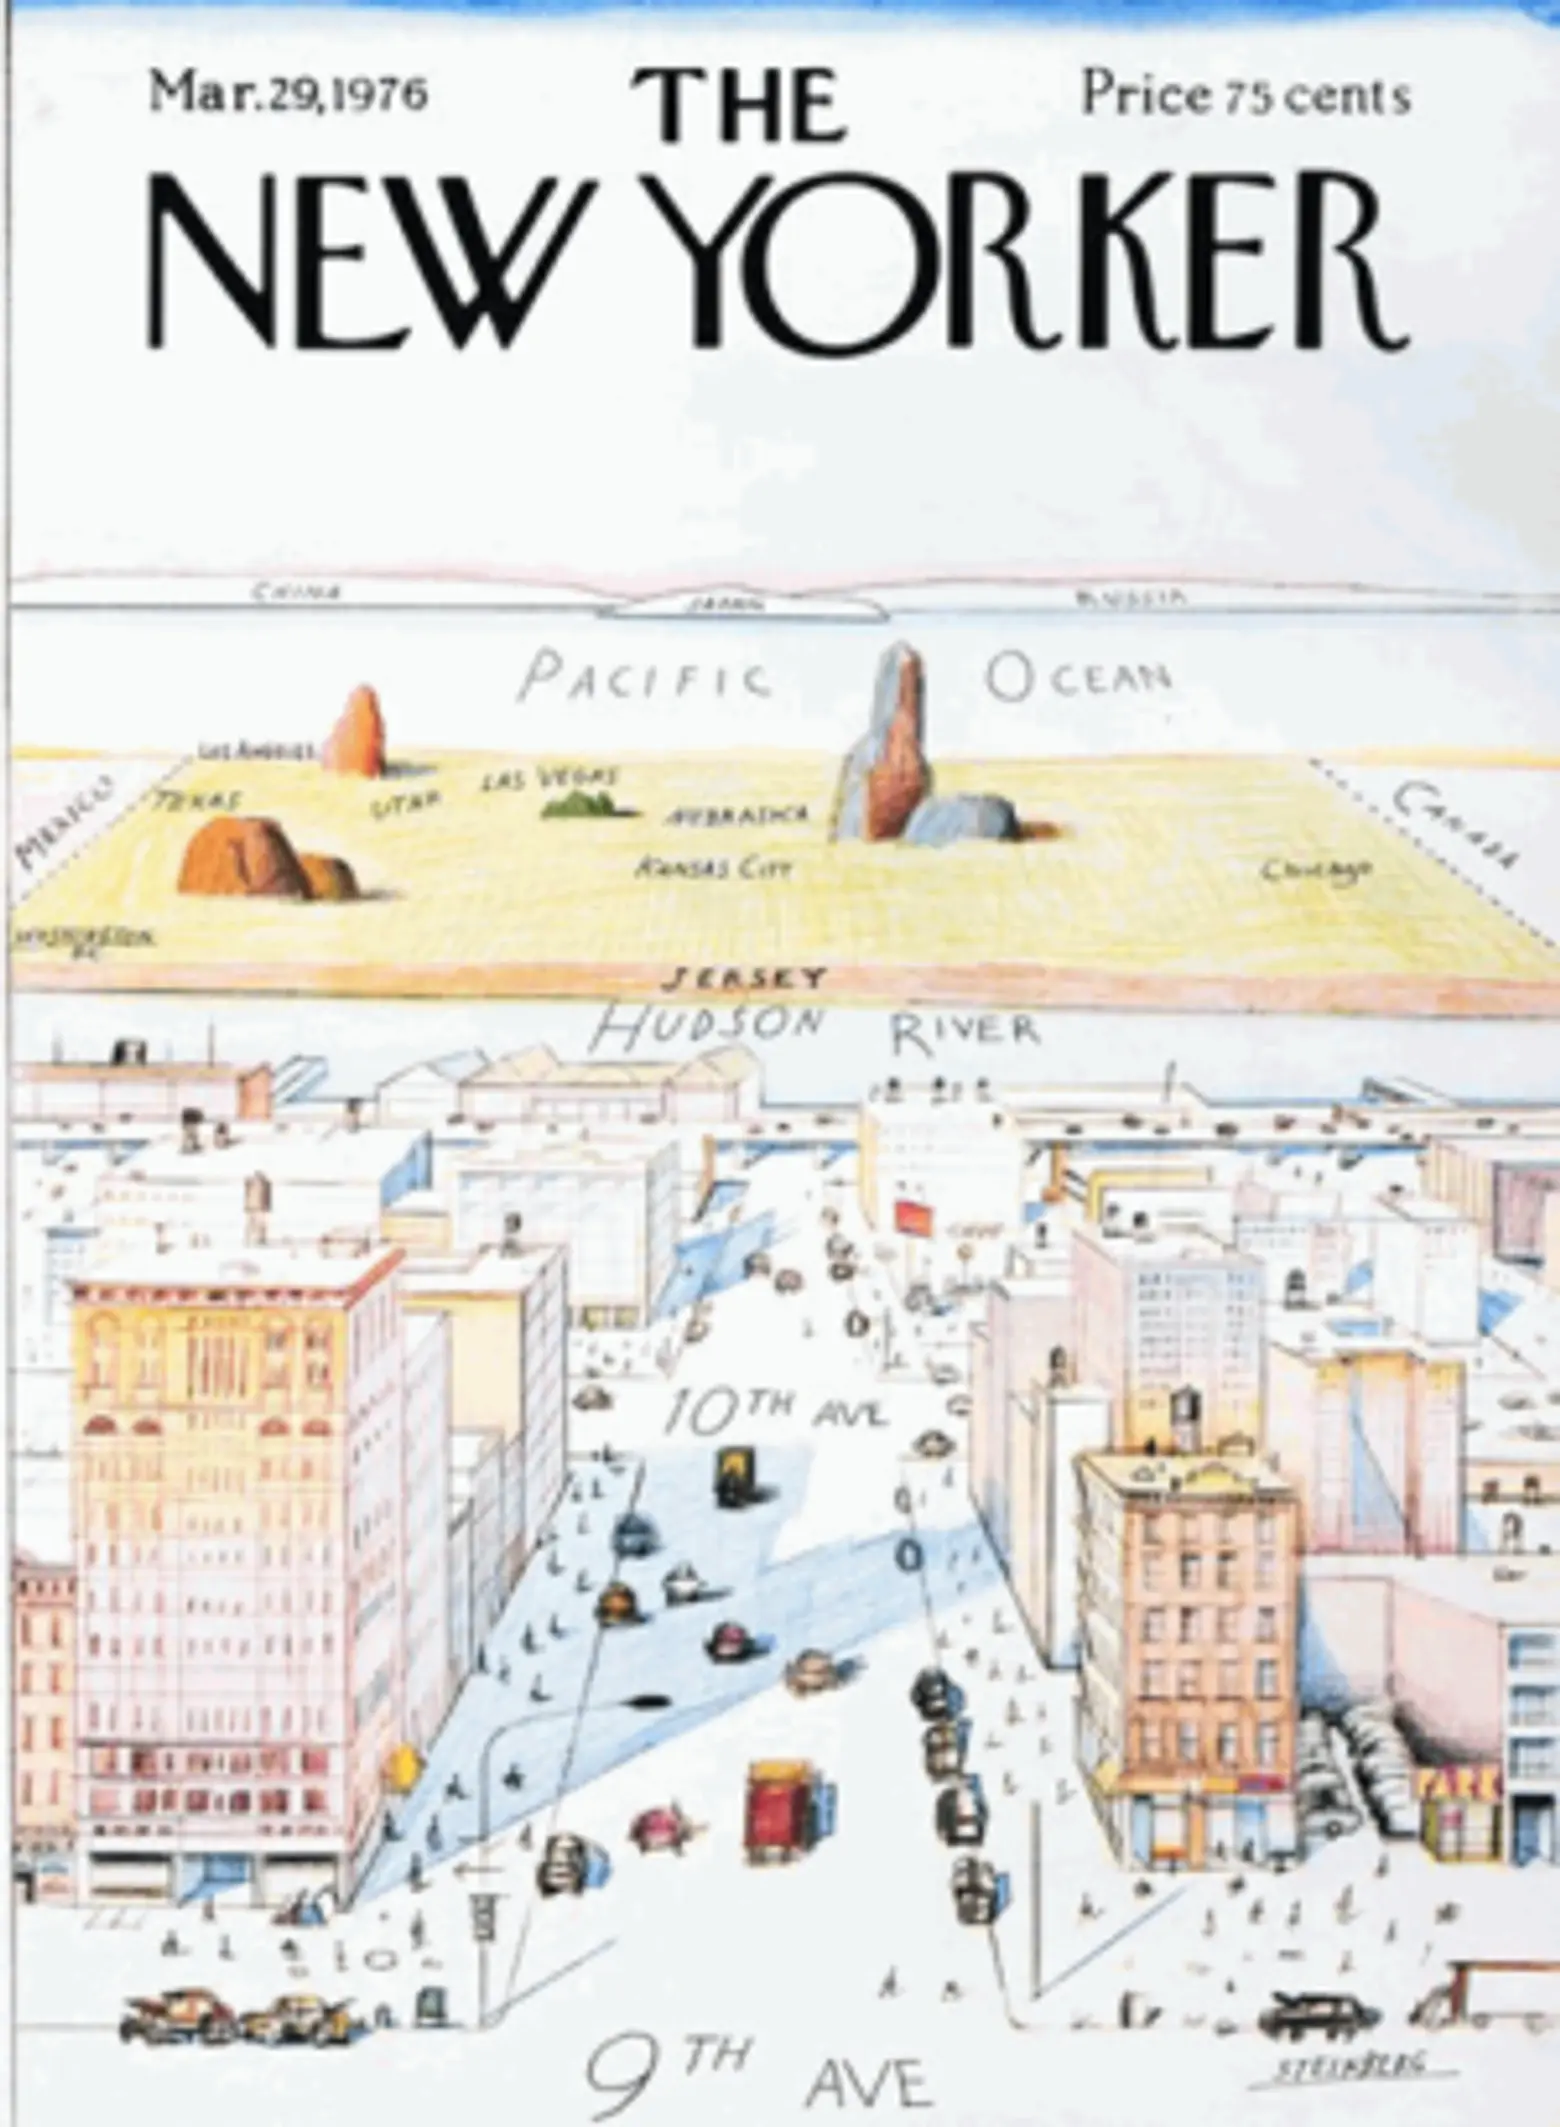 Saul Steinberg, View of the World from 9th Avenue, New Yorker covers, NYC far west side